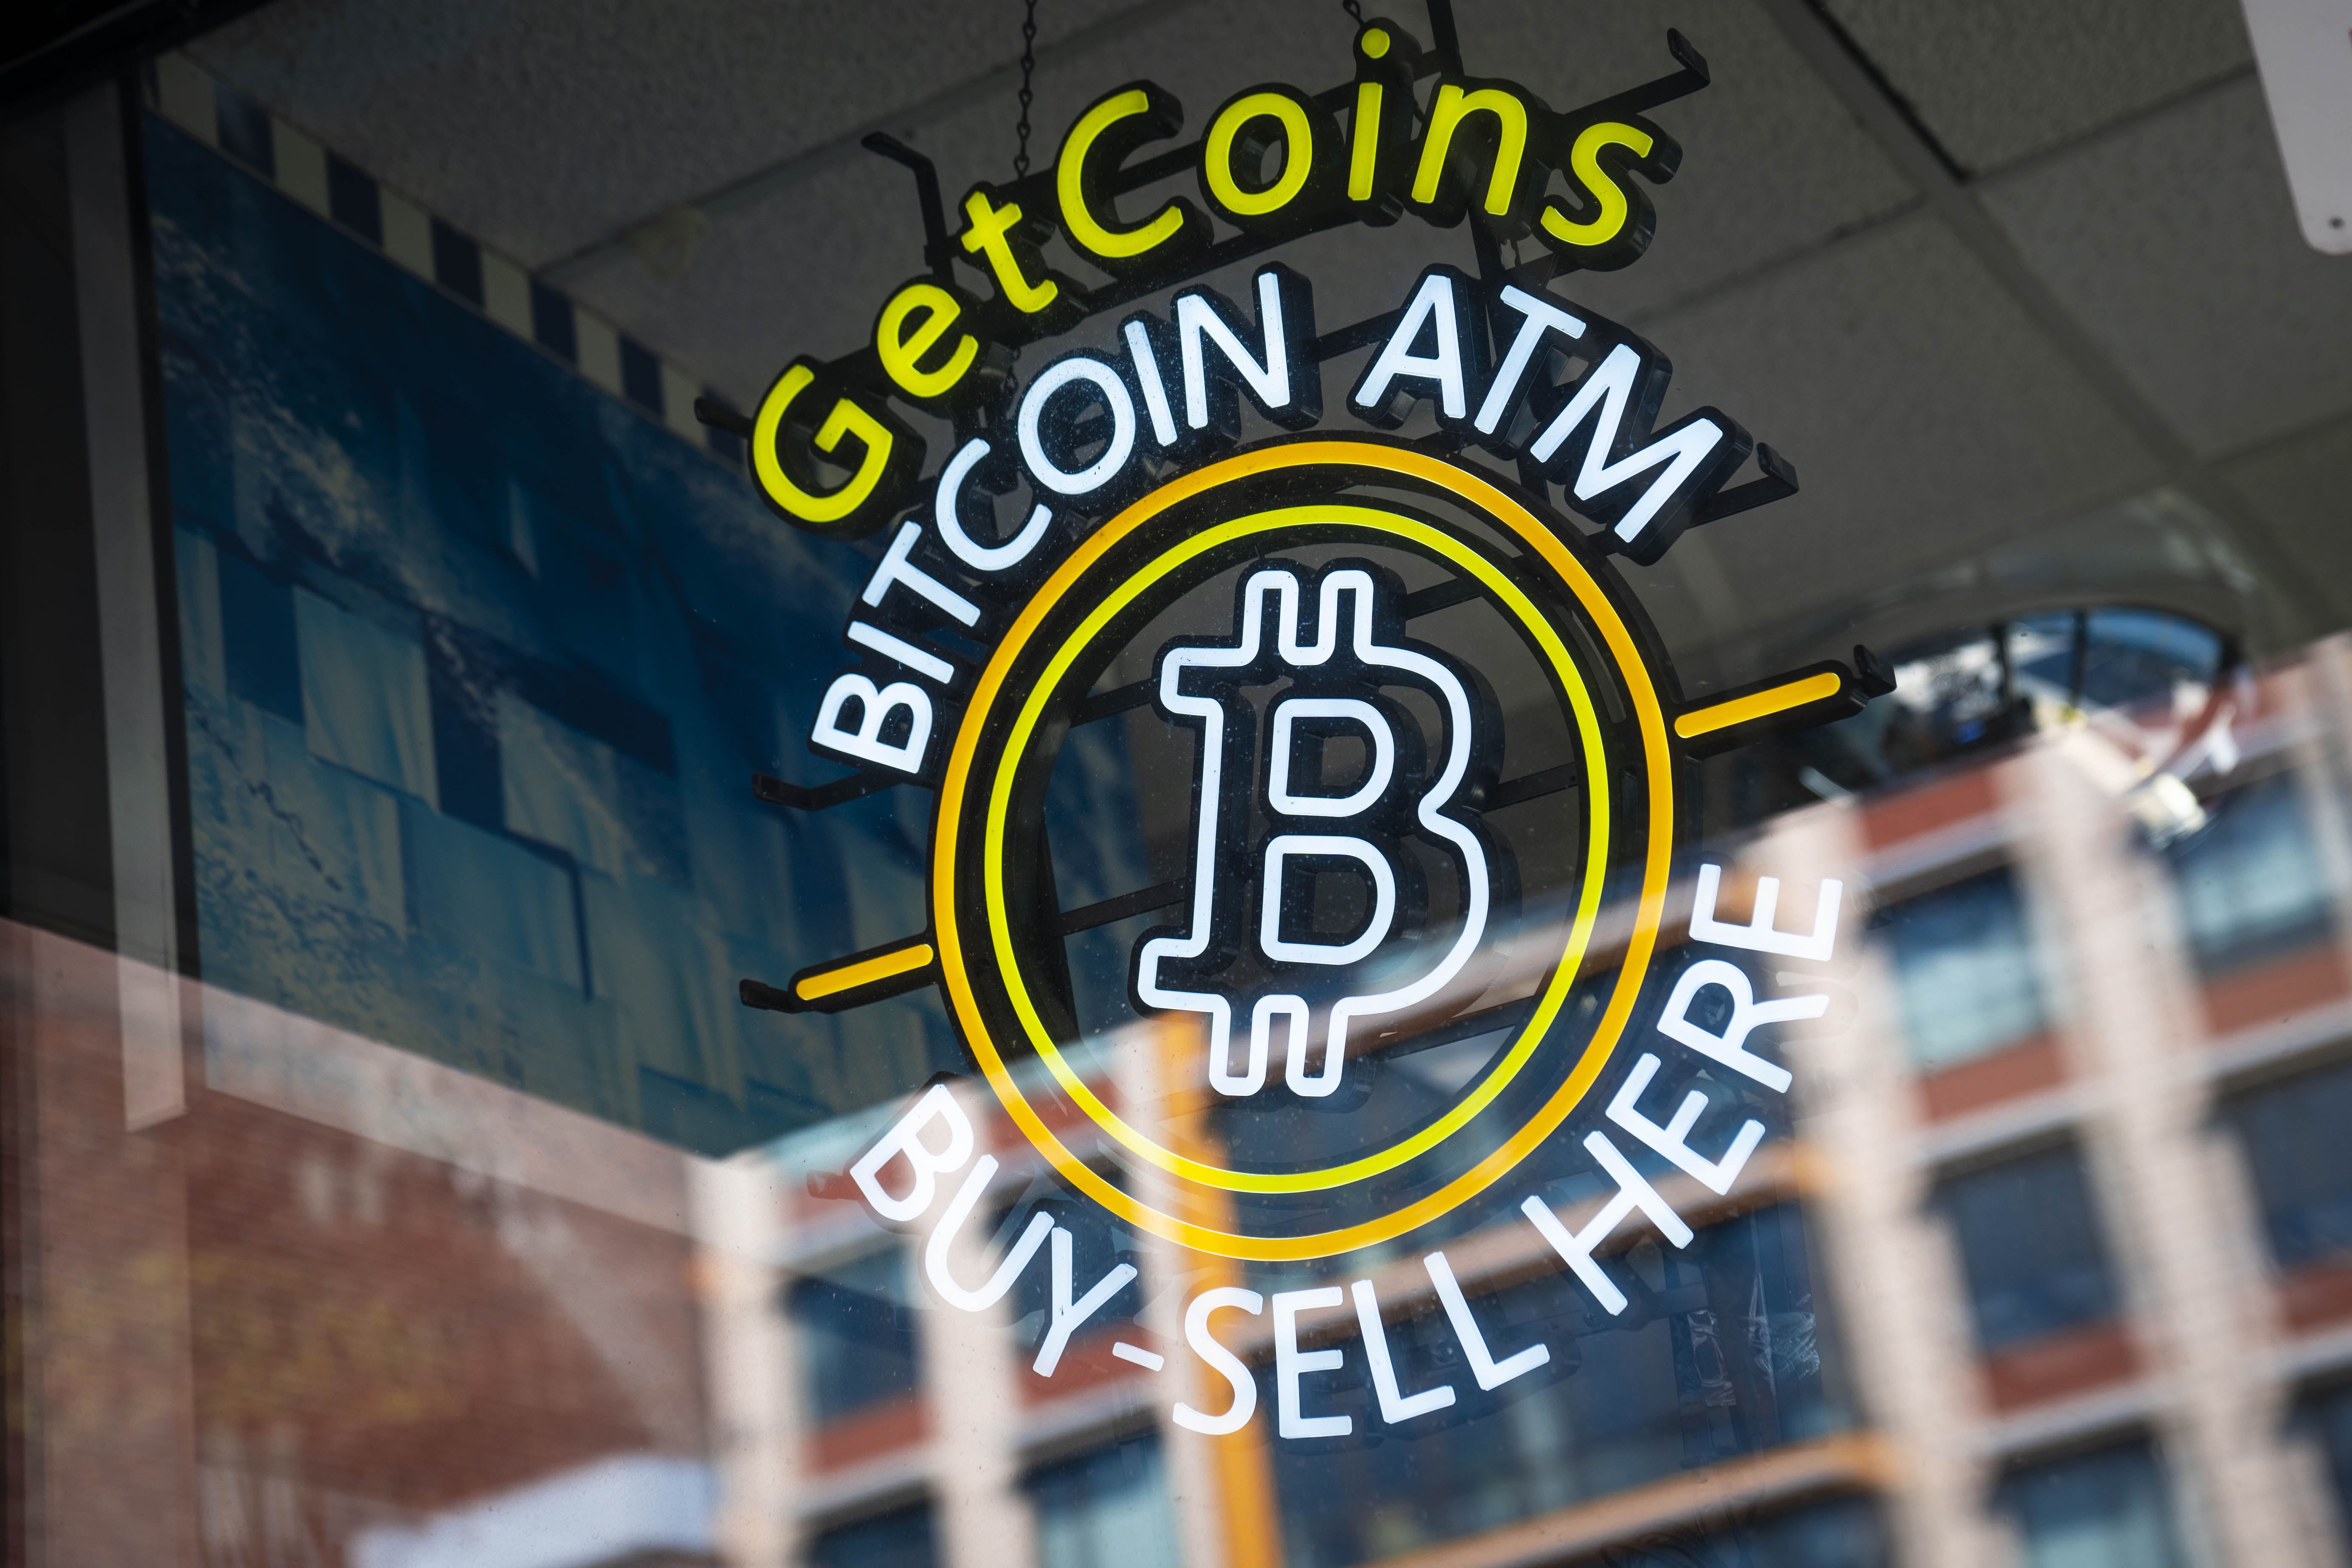 A sign for a bitcoin ATM in Washington, DC, reads “Get coins, bitcoin ATM, buy sell here.”